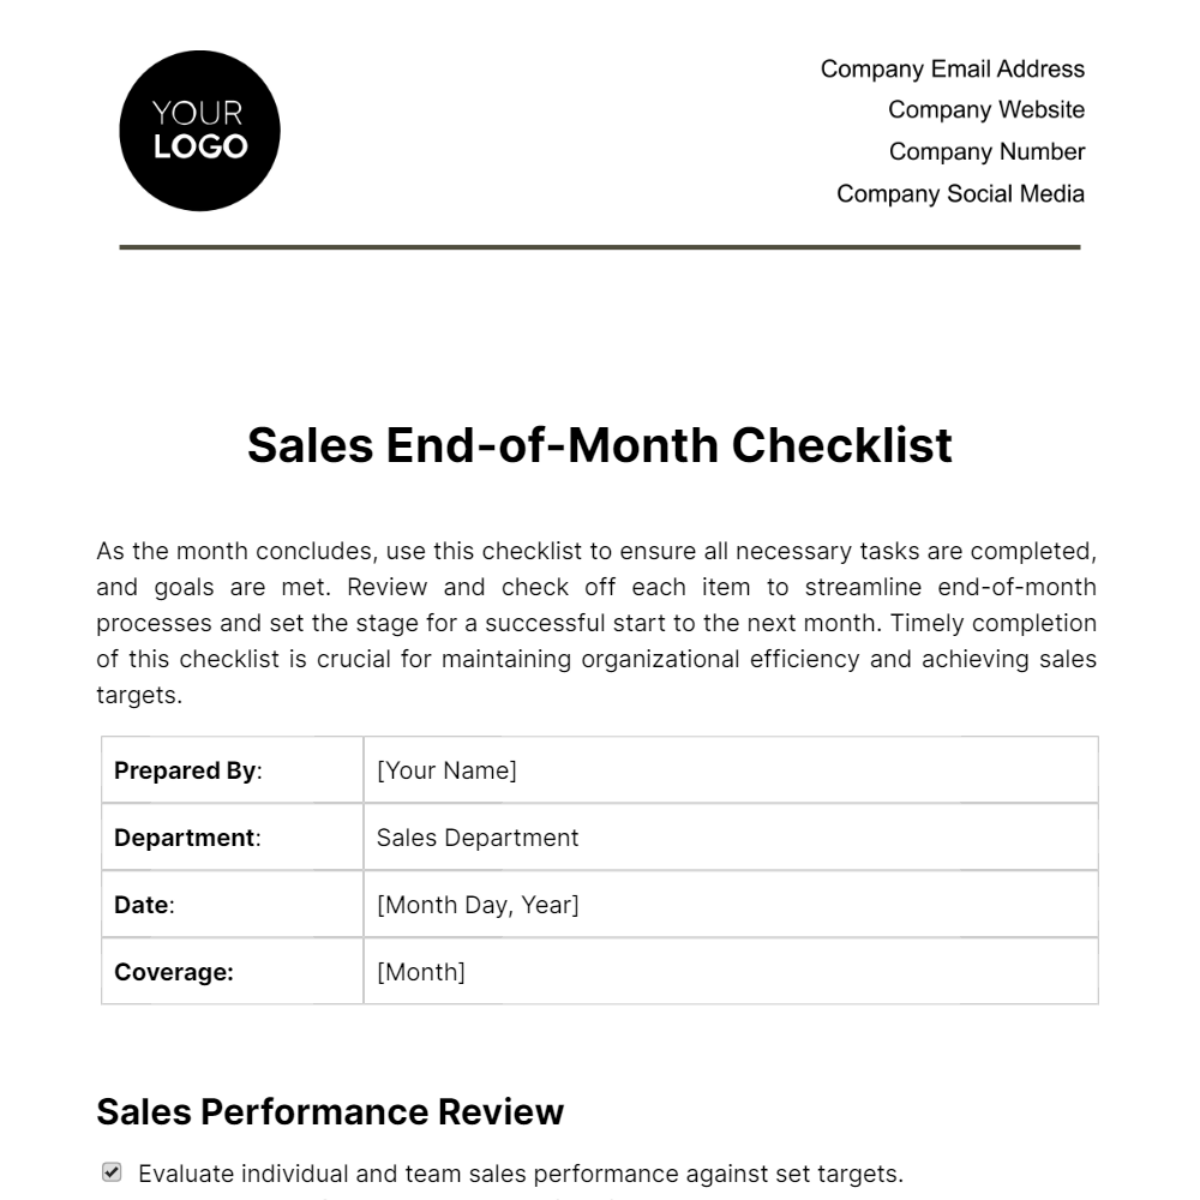 Free Sales End-of-Month Checklist Template